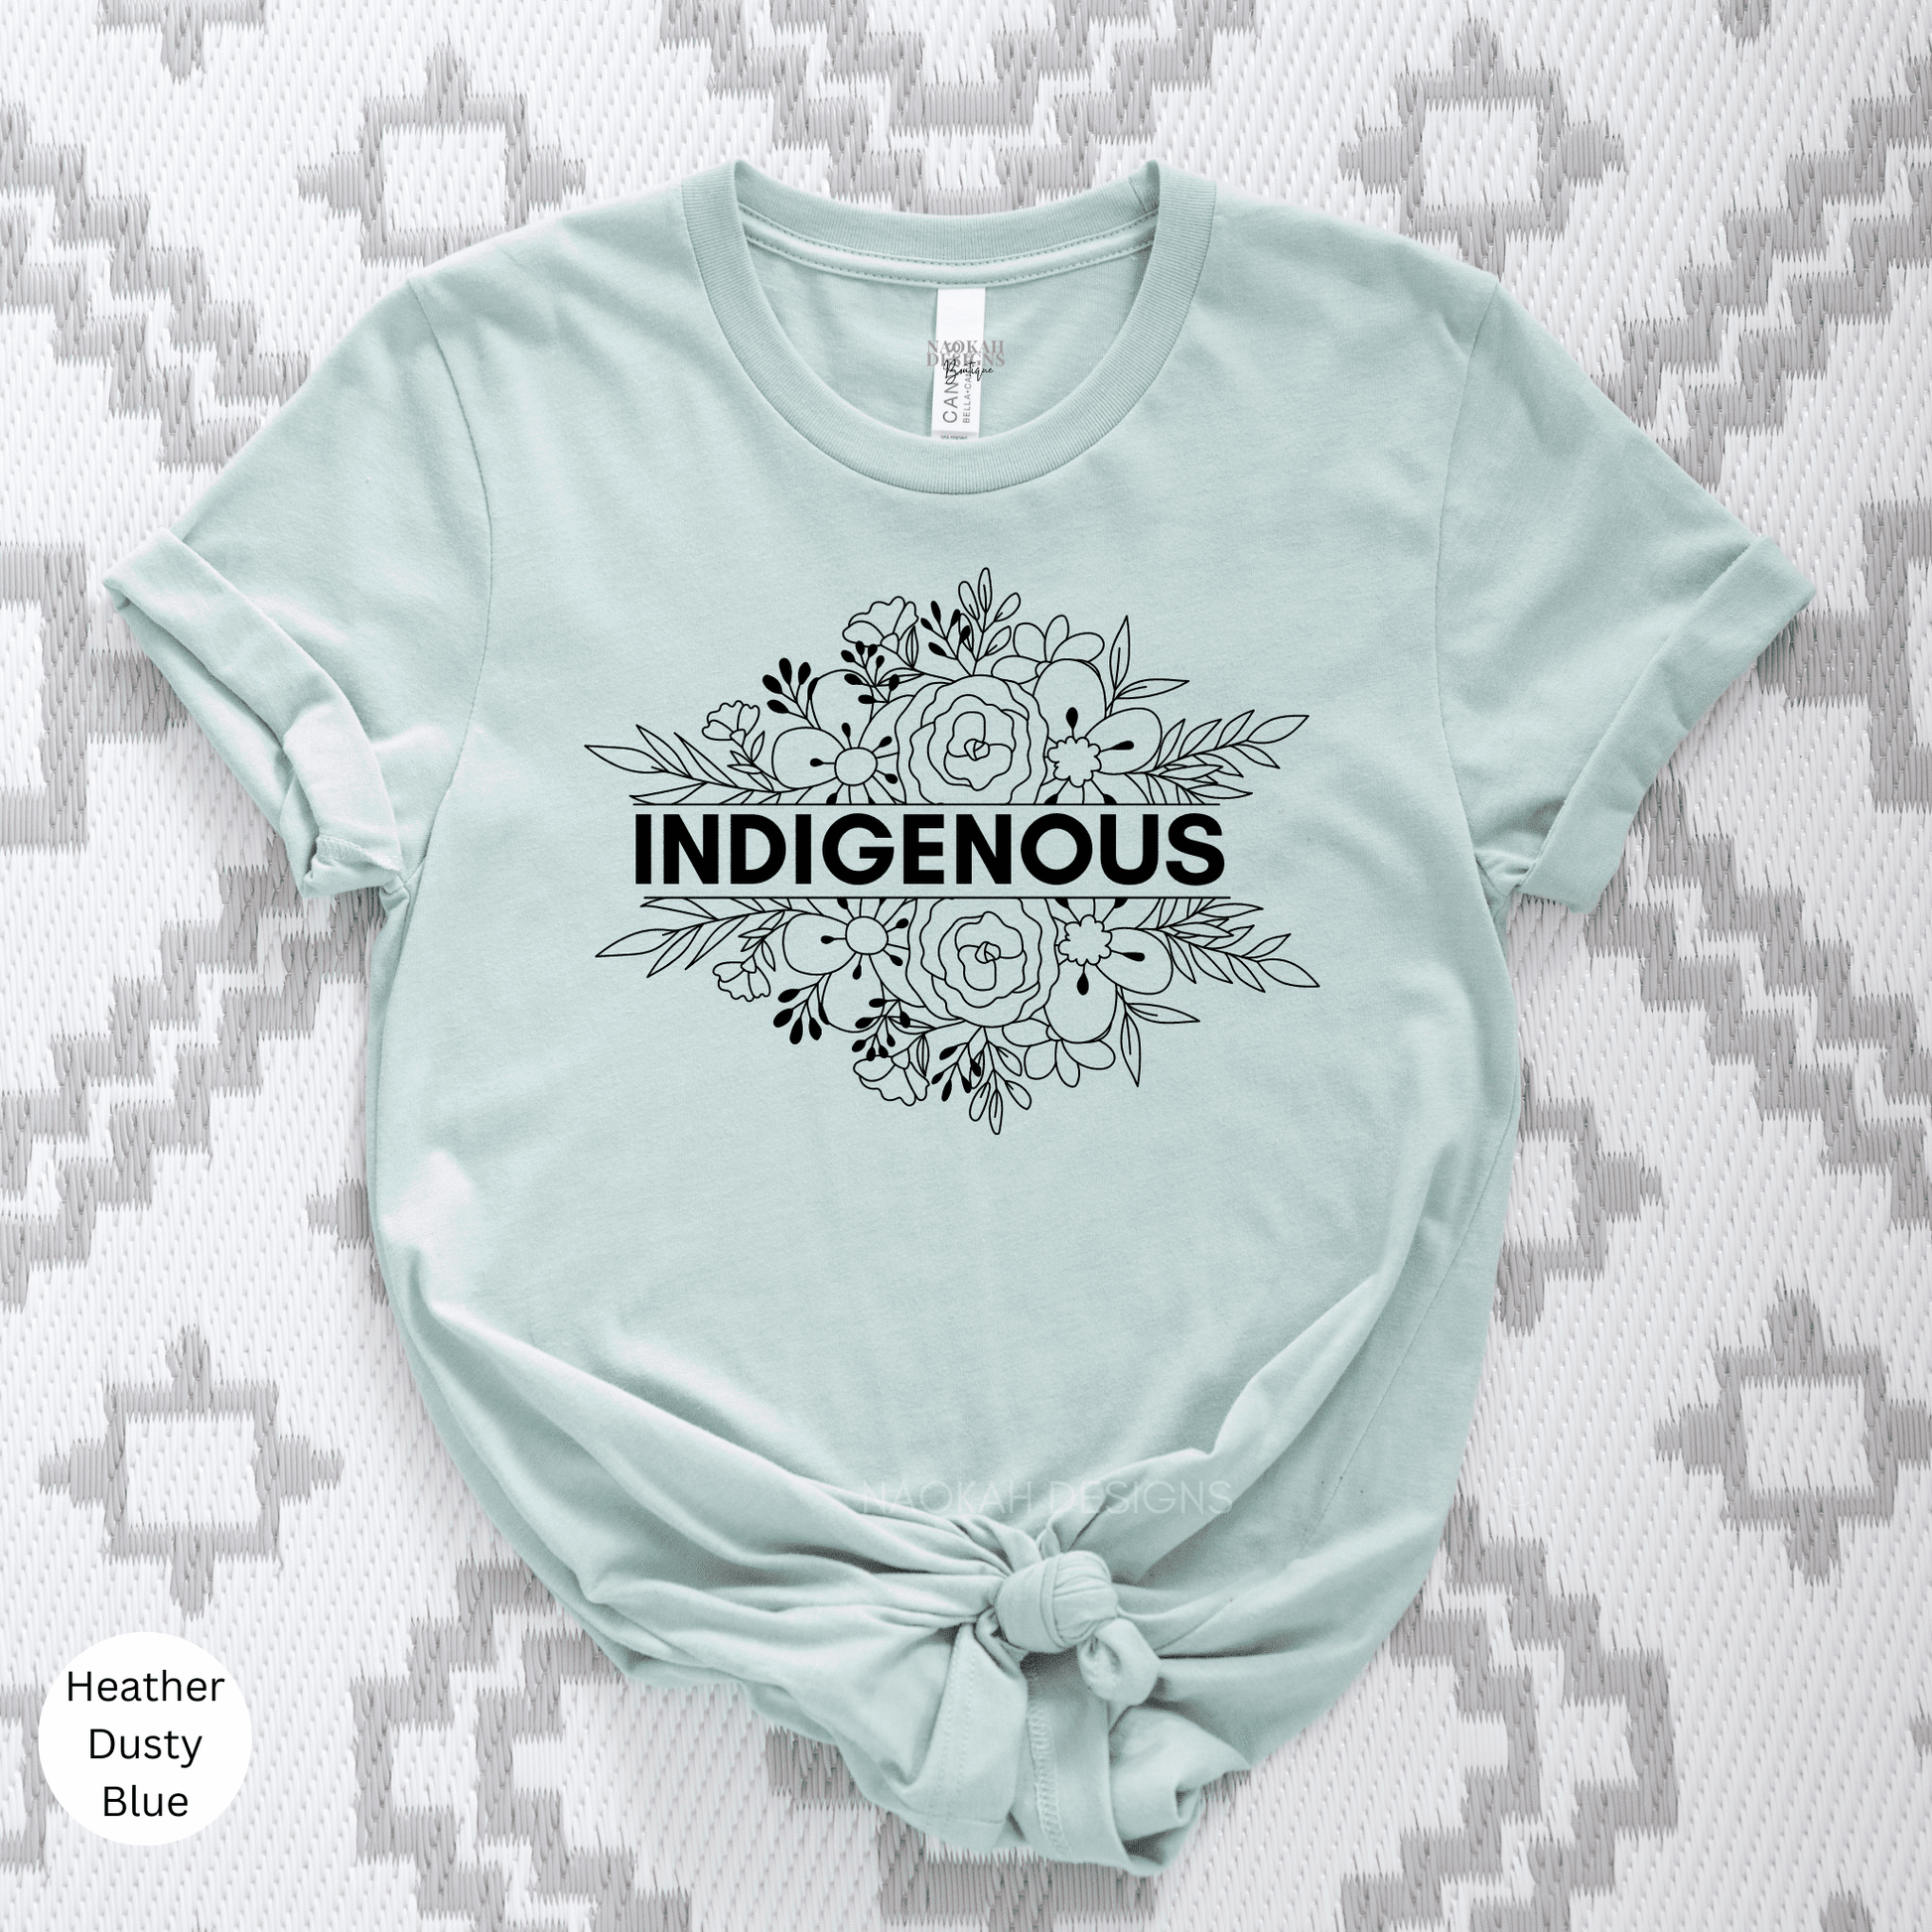 Indigenous floral shirt, Indigenous pride, native pride, resistance, decolonize shirt, ancestor’s wildest dreams shirt, human rights shirt, indigenous lives matter shirt, indigenous history month, ancestor dreams, melanin shirt, Indigenous educator shirt, Indigenous student shirt, decolonize education shirt, Native shirt, native teacher shirt, Native American shirt, Afro Indigenous AF, Afro Native, Afrocentric, Indigenous Owned Shop, Embrace black and Indigenous spiritualities